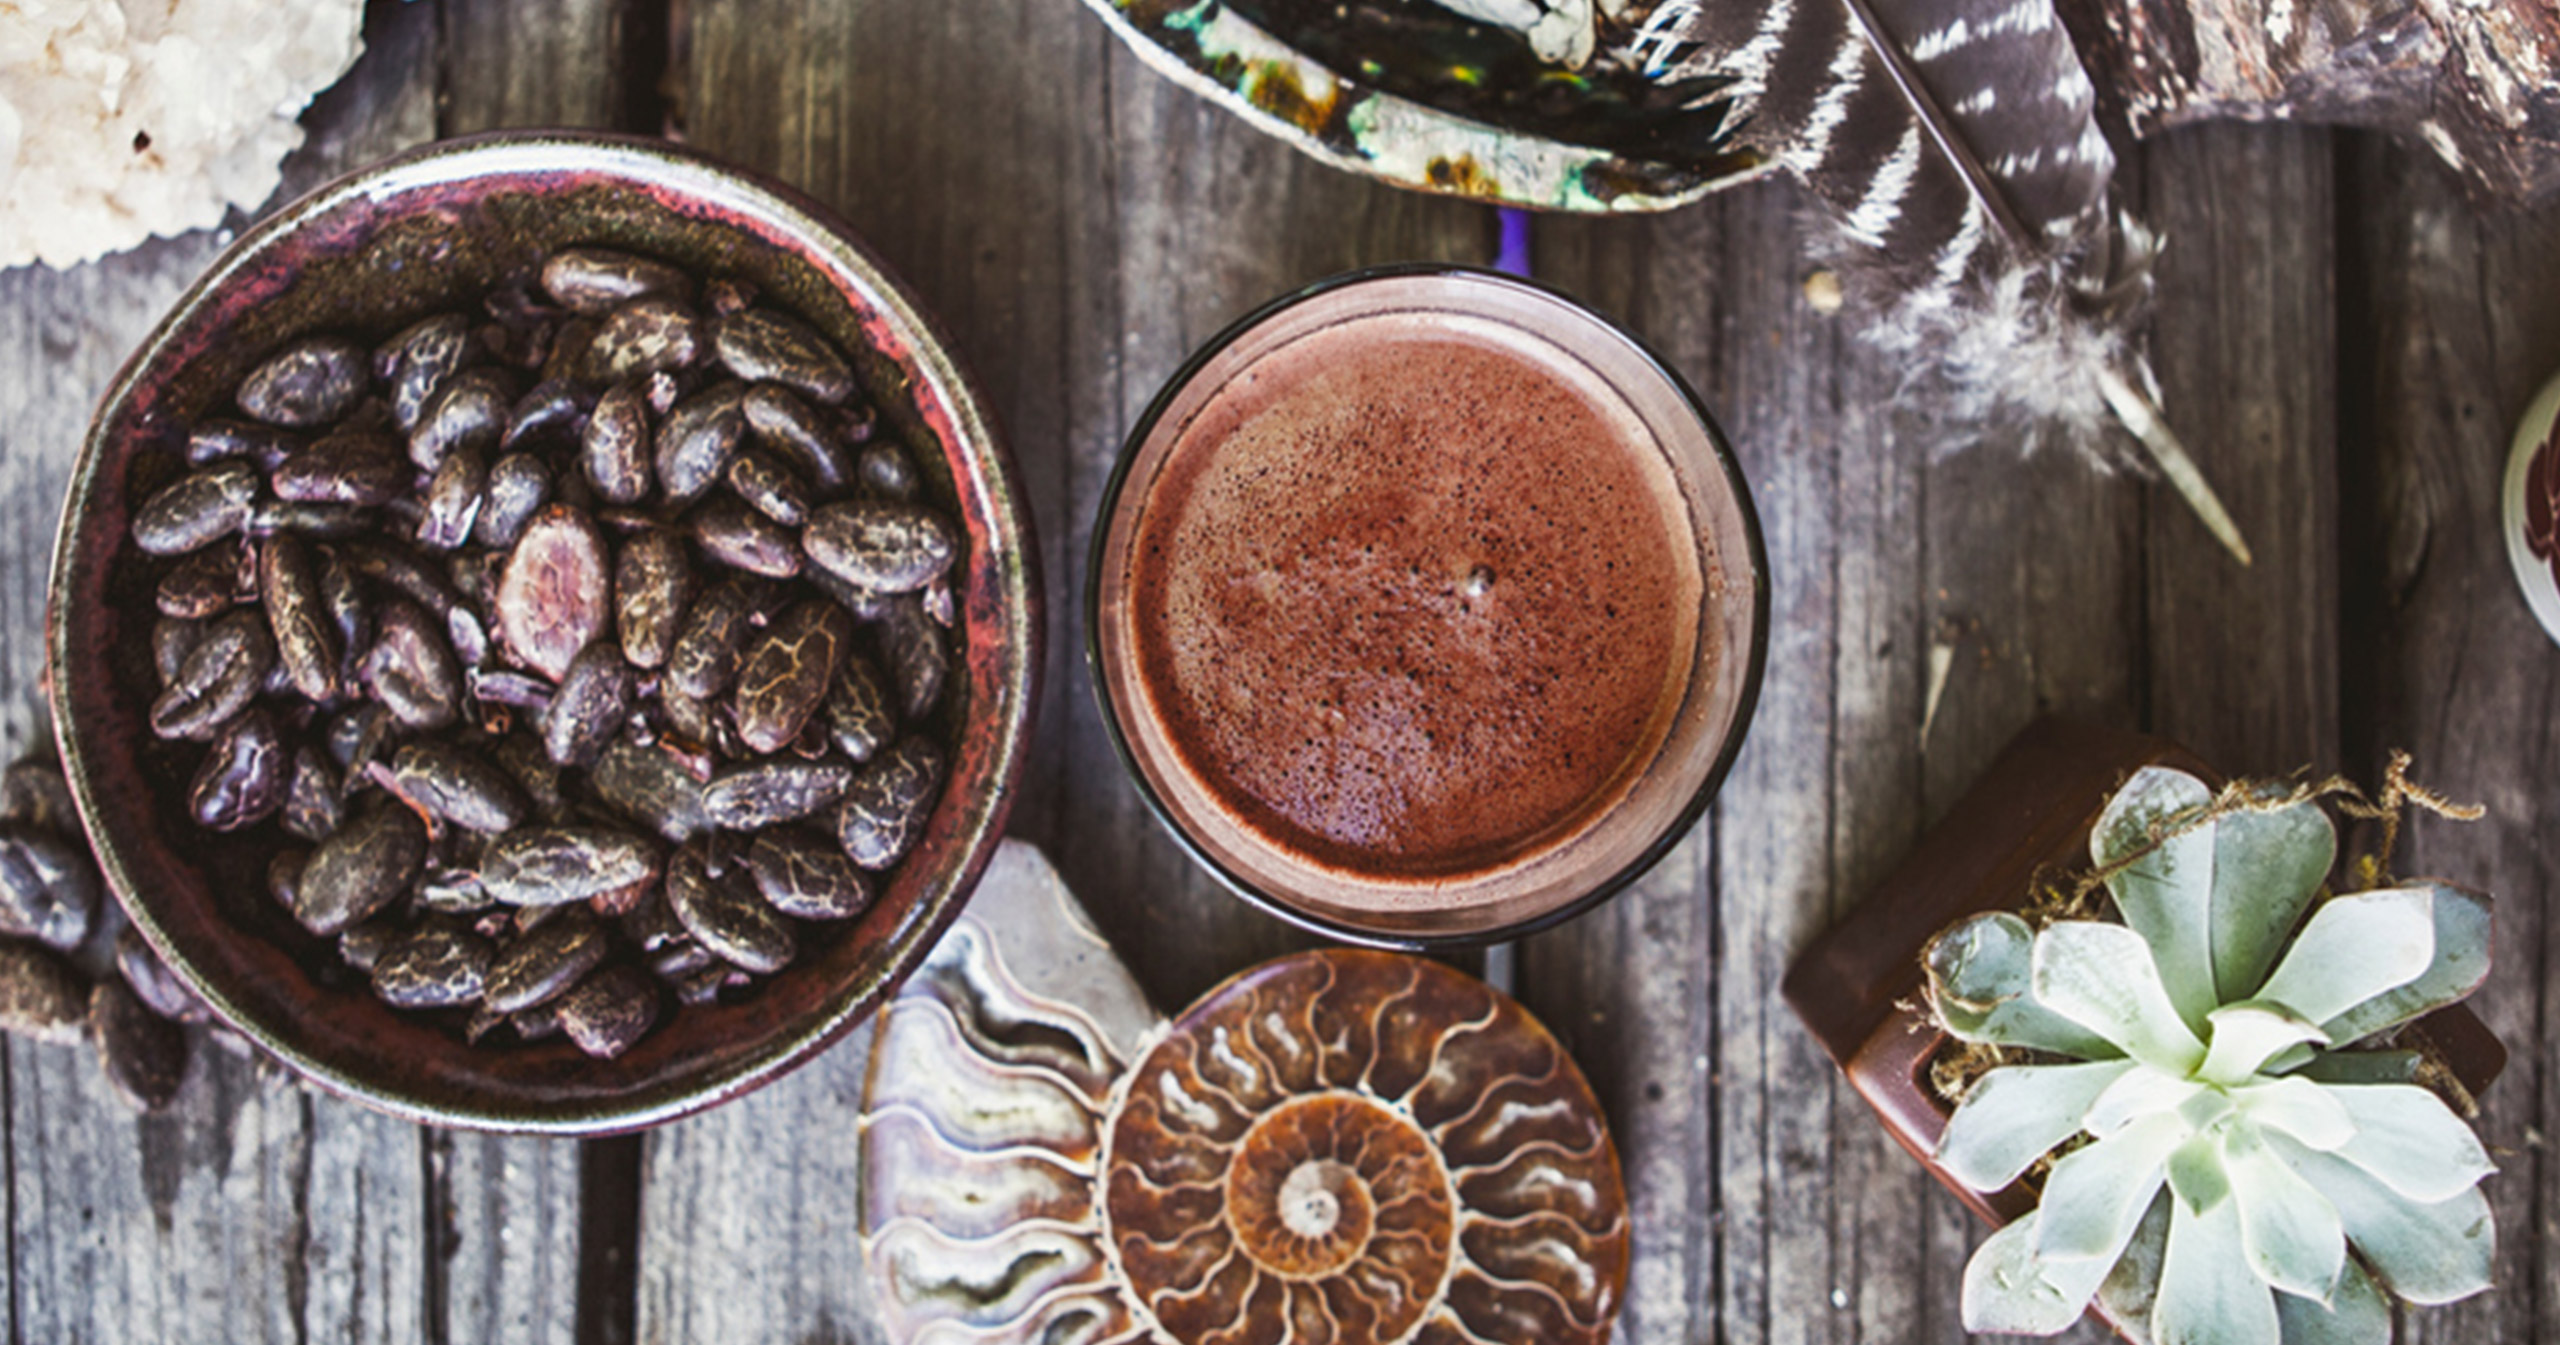 Shamans Cacao and other ritual items.